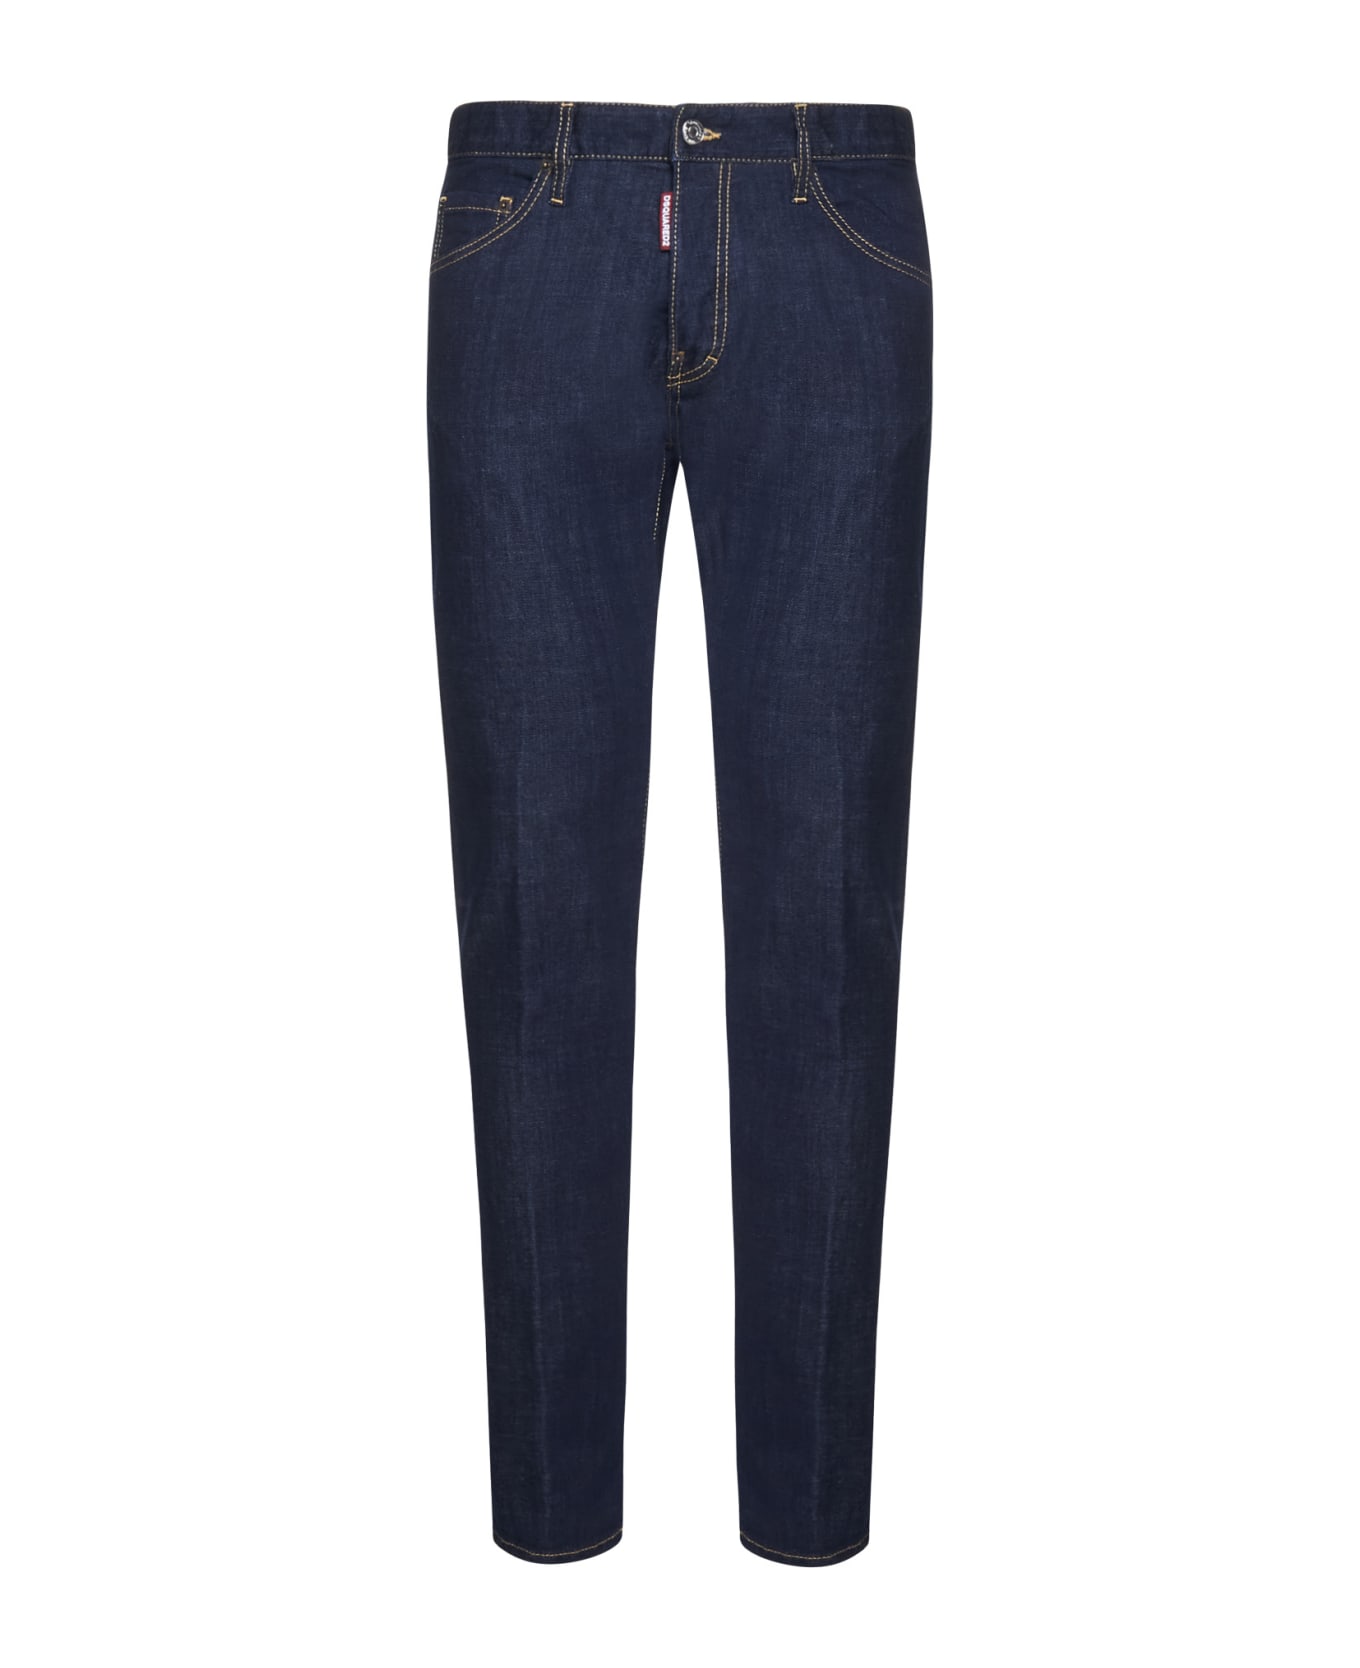 Dsquared2 Cool Guy Jeans In Dark Rinse Wash - Blue Navy